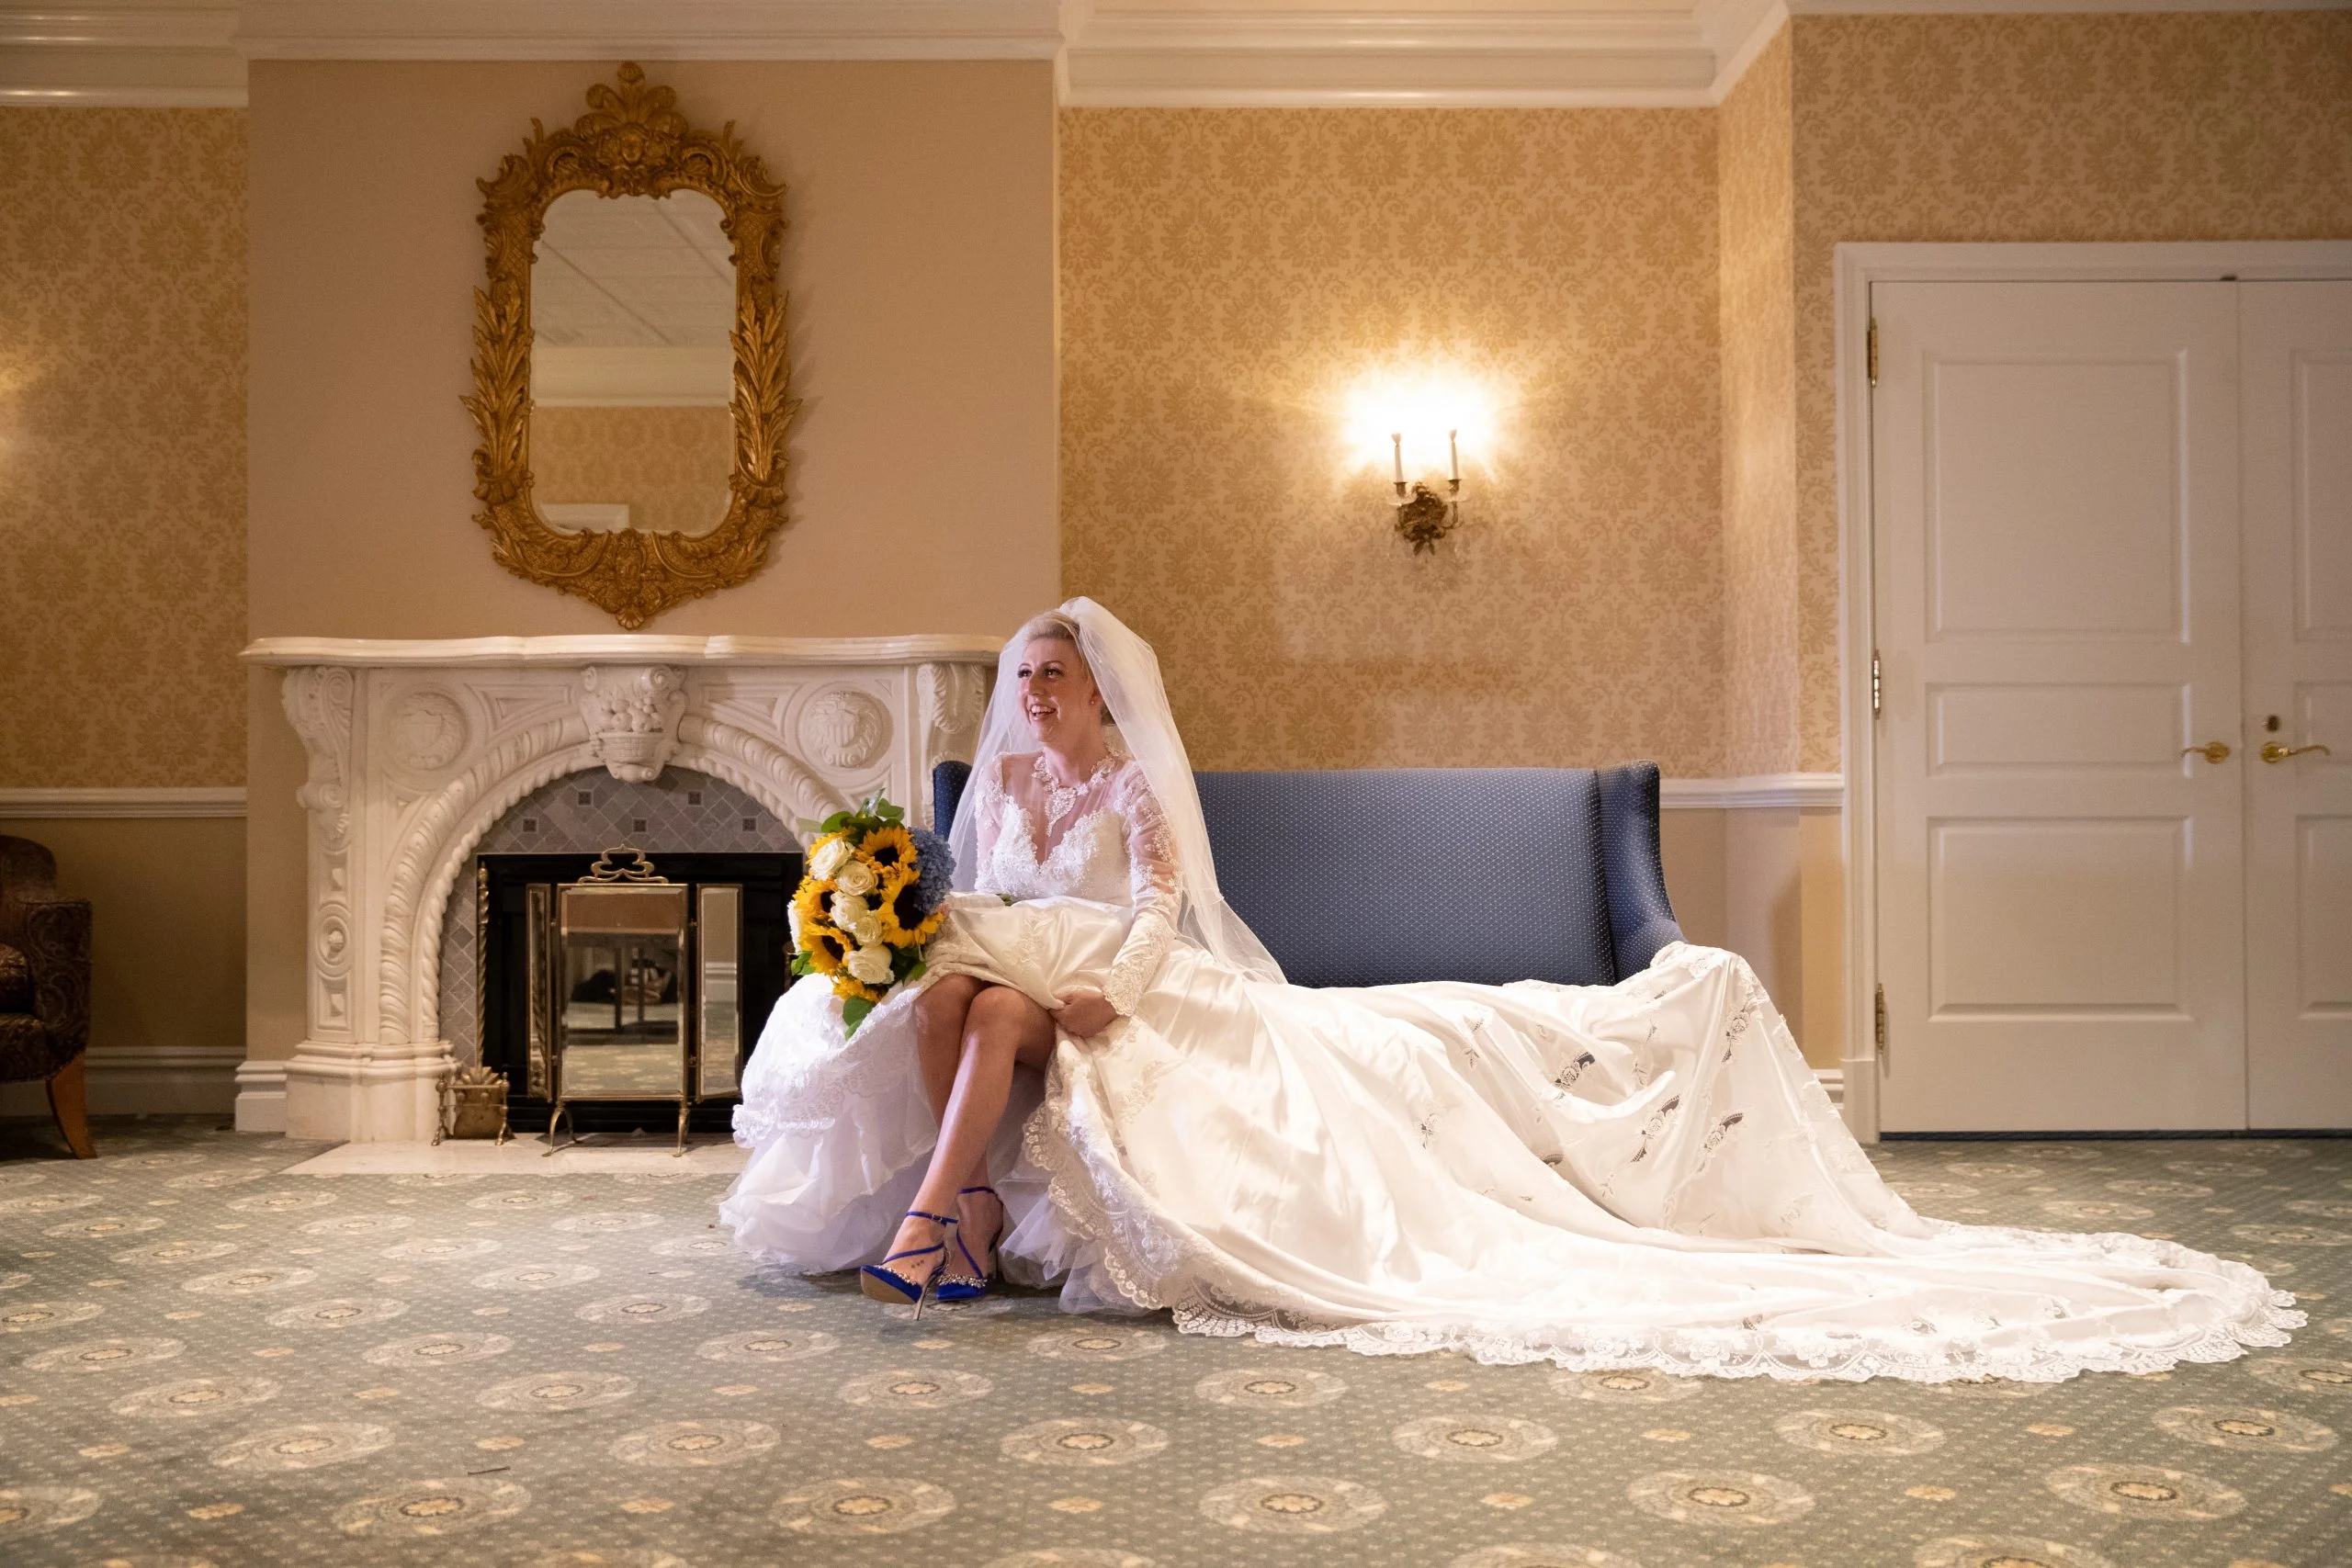 A bride in a wedding dress sitting on a couch in a room.